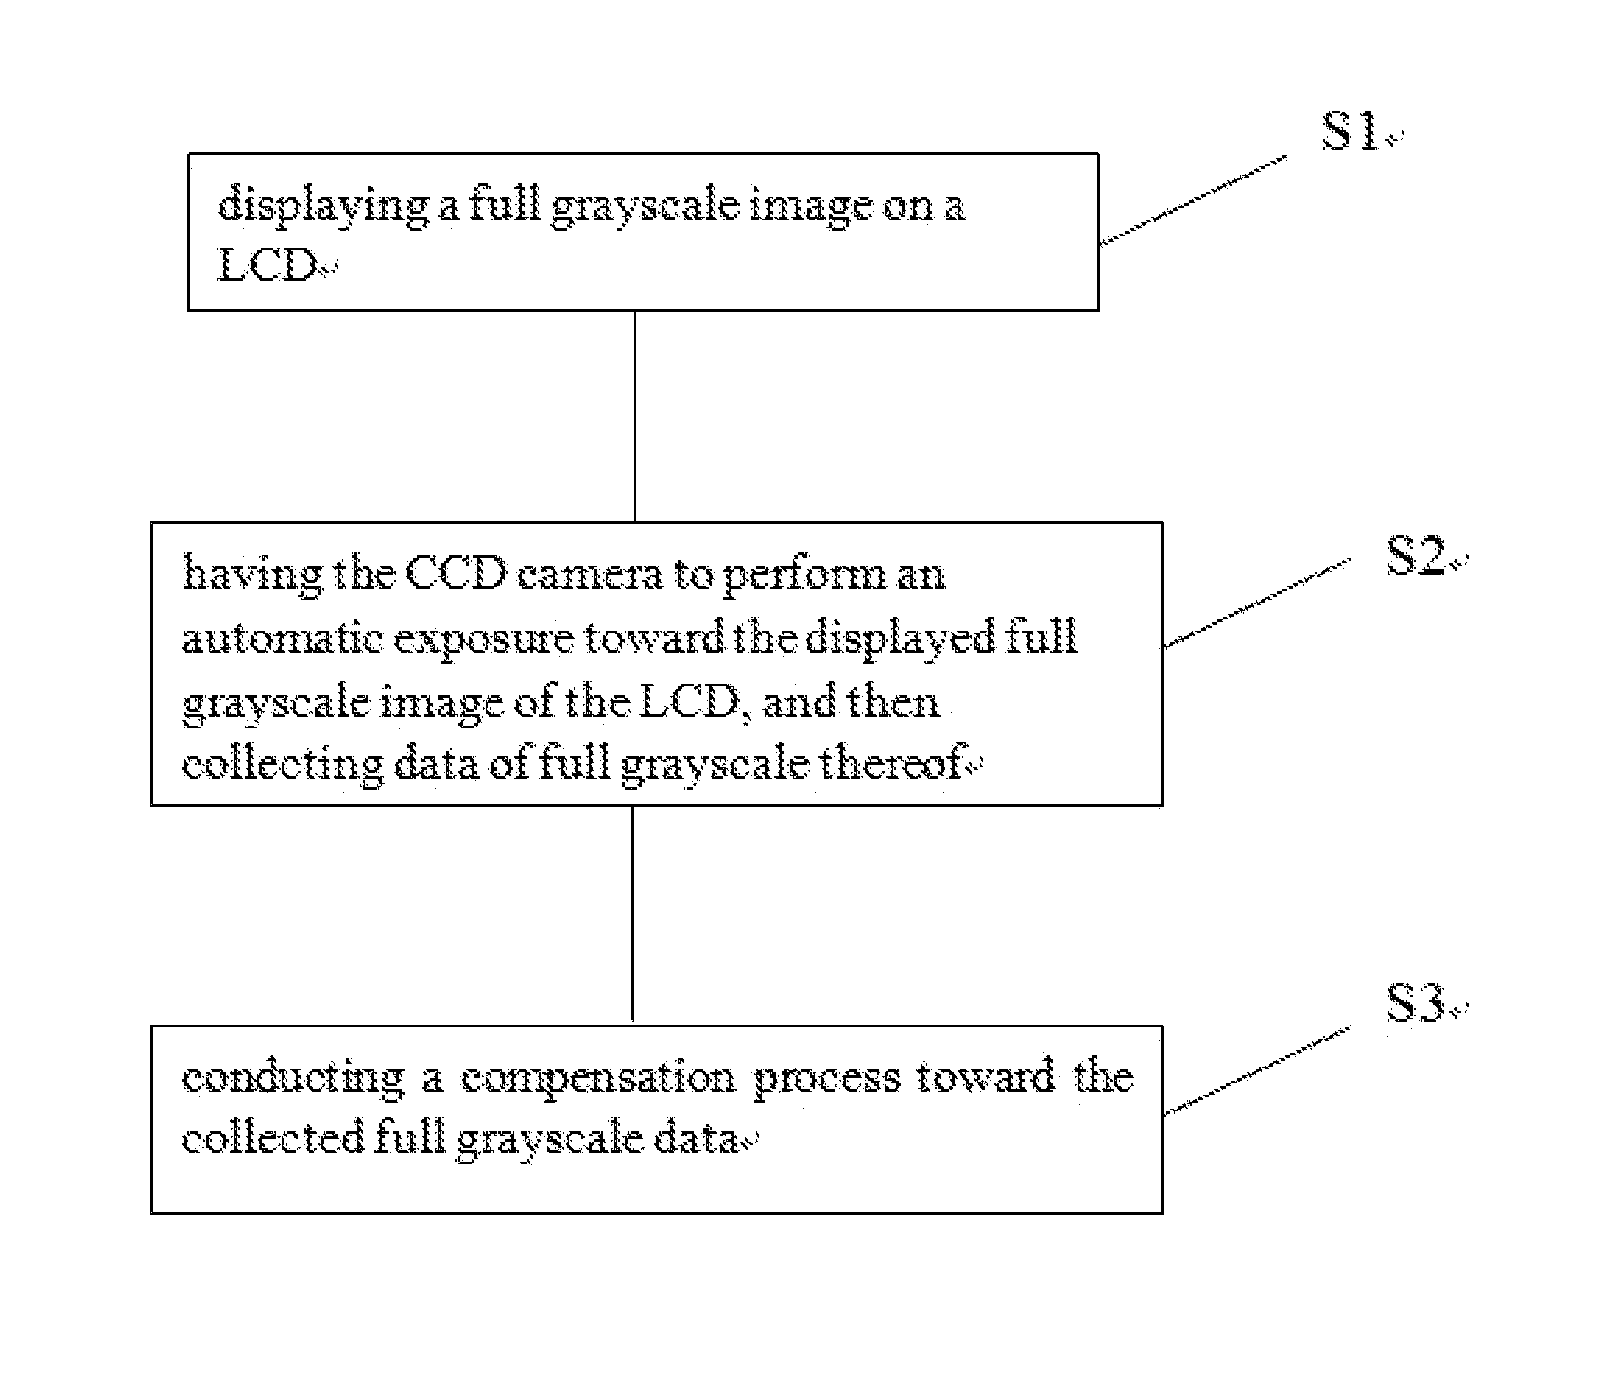 Method for Collecting Full Grayscale Data of LCD Based On CCD Camera